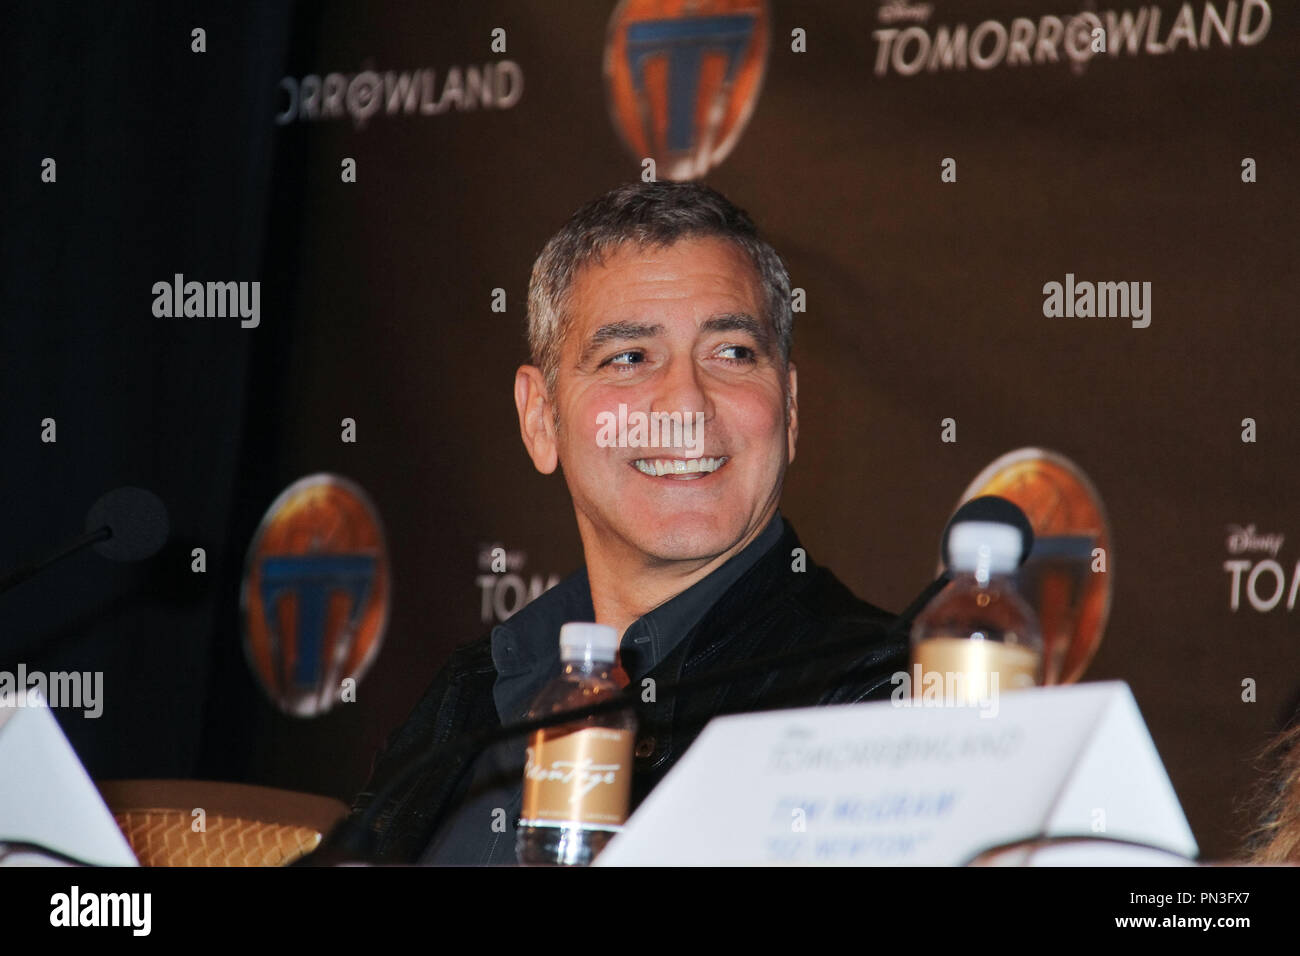 George Clooney  05/08/2015 'Tomorrowland' Press Conference held at Montage Hotels & Resorts in Beverly Hills, CA Photo by Izumi Hasegawa / HNW / PictureLux Stock Photo